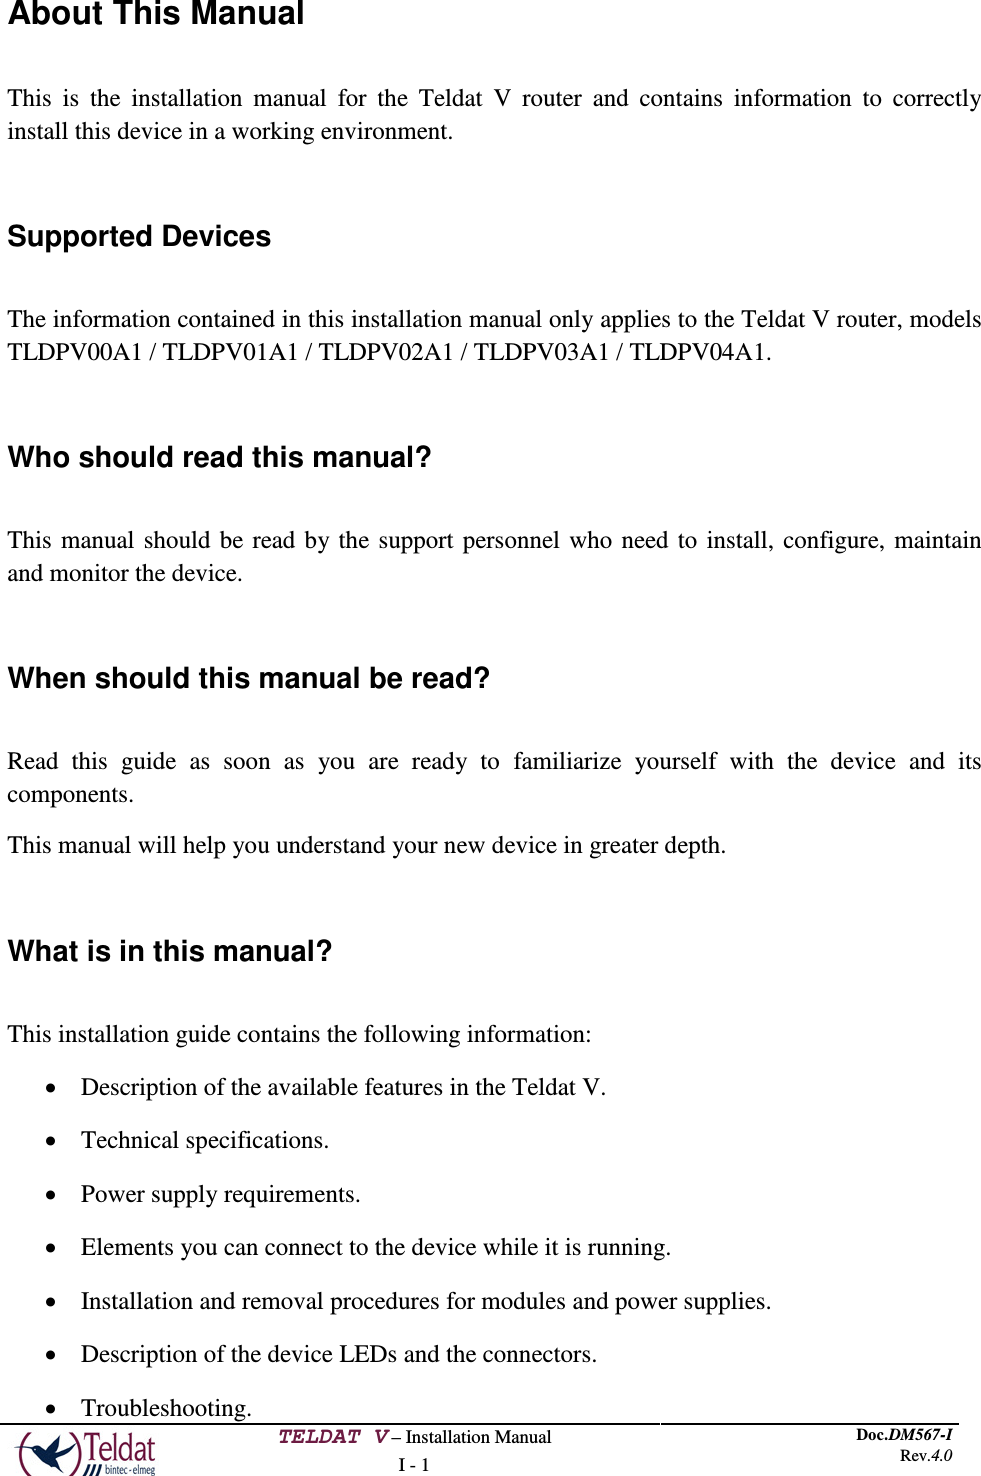  TELDAT V – Installation Manual I - 1 Doc.DM567-I Rev.4.0  About This Manual  This is the installation manual for the Teldat V  router  and contains information to correctly install this device in a working environment.  Supported Devices  The information contained in this installation manual only applies to the Teldat V router, models TLDPV00A1 / TLDPV01A1 / TLDPV02A1 / TLDPV03A1 / TLDPV04A1.  Who should read this manual?  This manual should be read by the support personnel who need to install, configure, maintain and monitor the device.  When should this manual be read?  Read this guide as soon as you are ready to familiarize yourself with the device and its components. This manual will help you understand your new device in greater depth.  What is in this manual?  This installation guide contains the following information: • Description of the available features in the Teldat V. • Technical specifications. • Power supply requirements. • Elements you can connect to the device while it is running. • Installation and removal procedures for modules and power supplies. • Description of the device LEDs and the connectors. • Troubleshooting. 